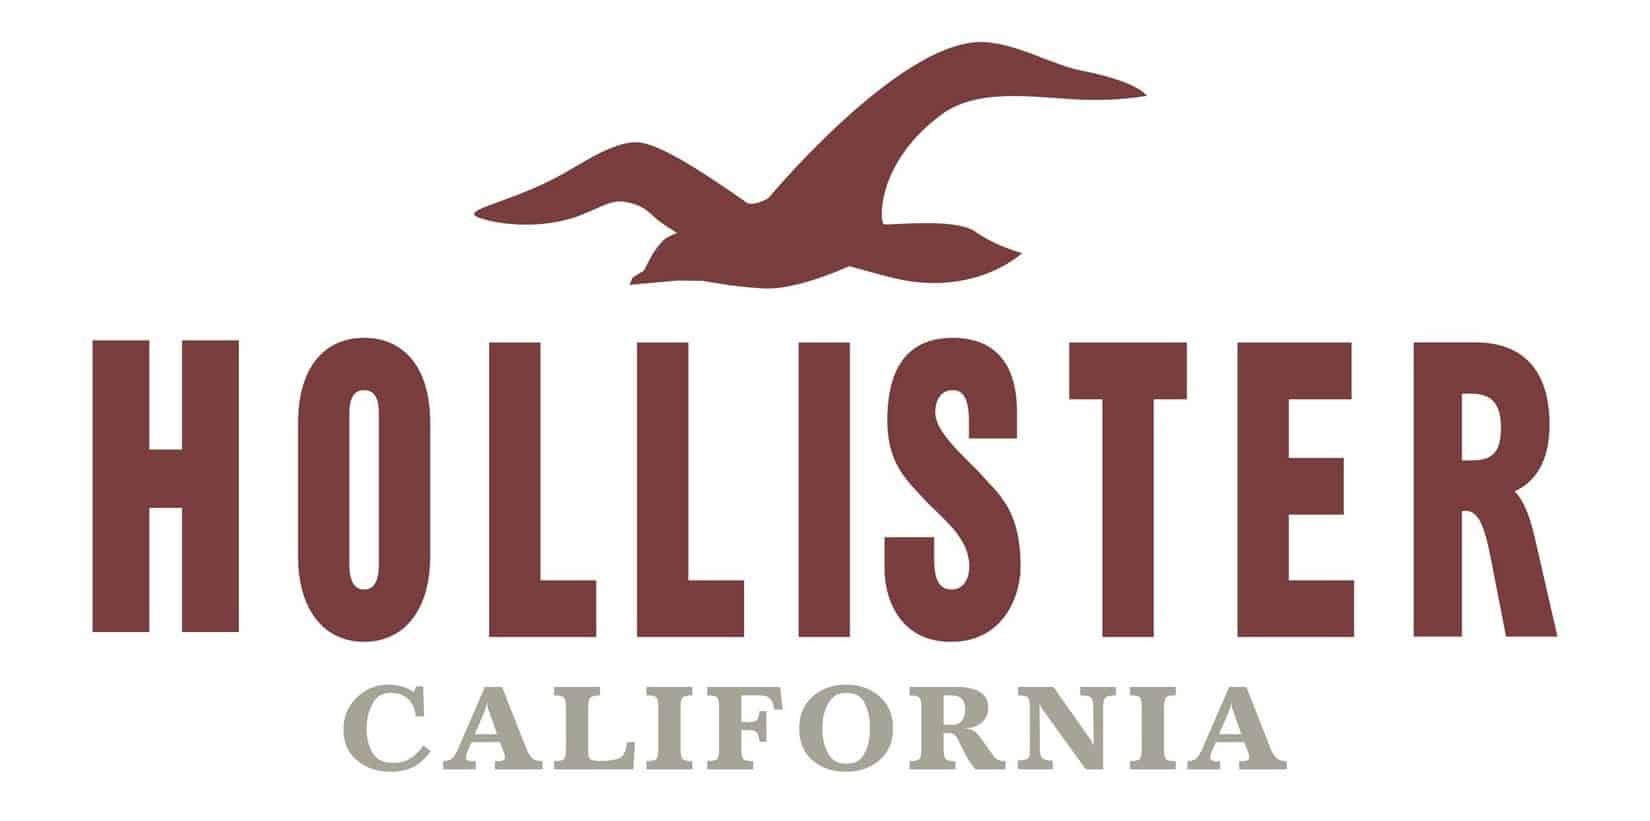 clothing stores like hollister